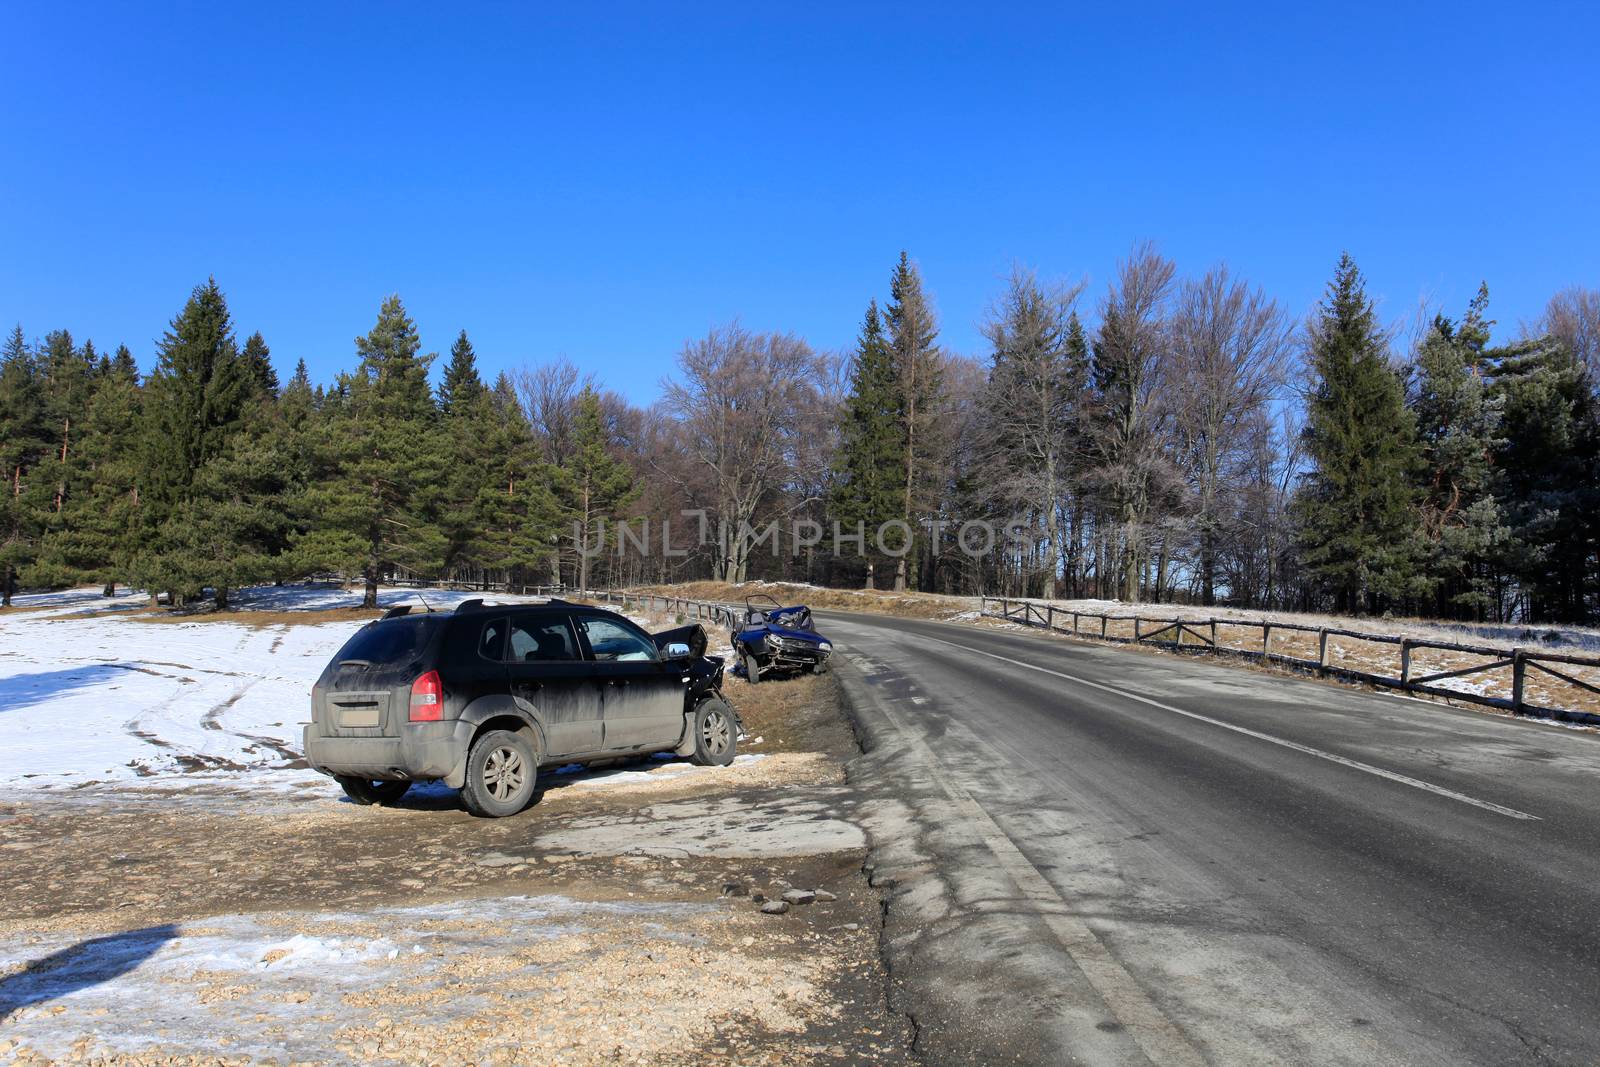 Two cars damaged by crash accident on side of the road